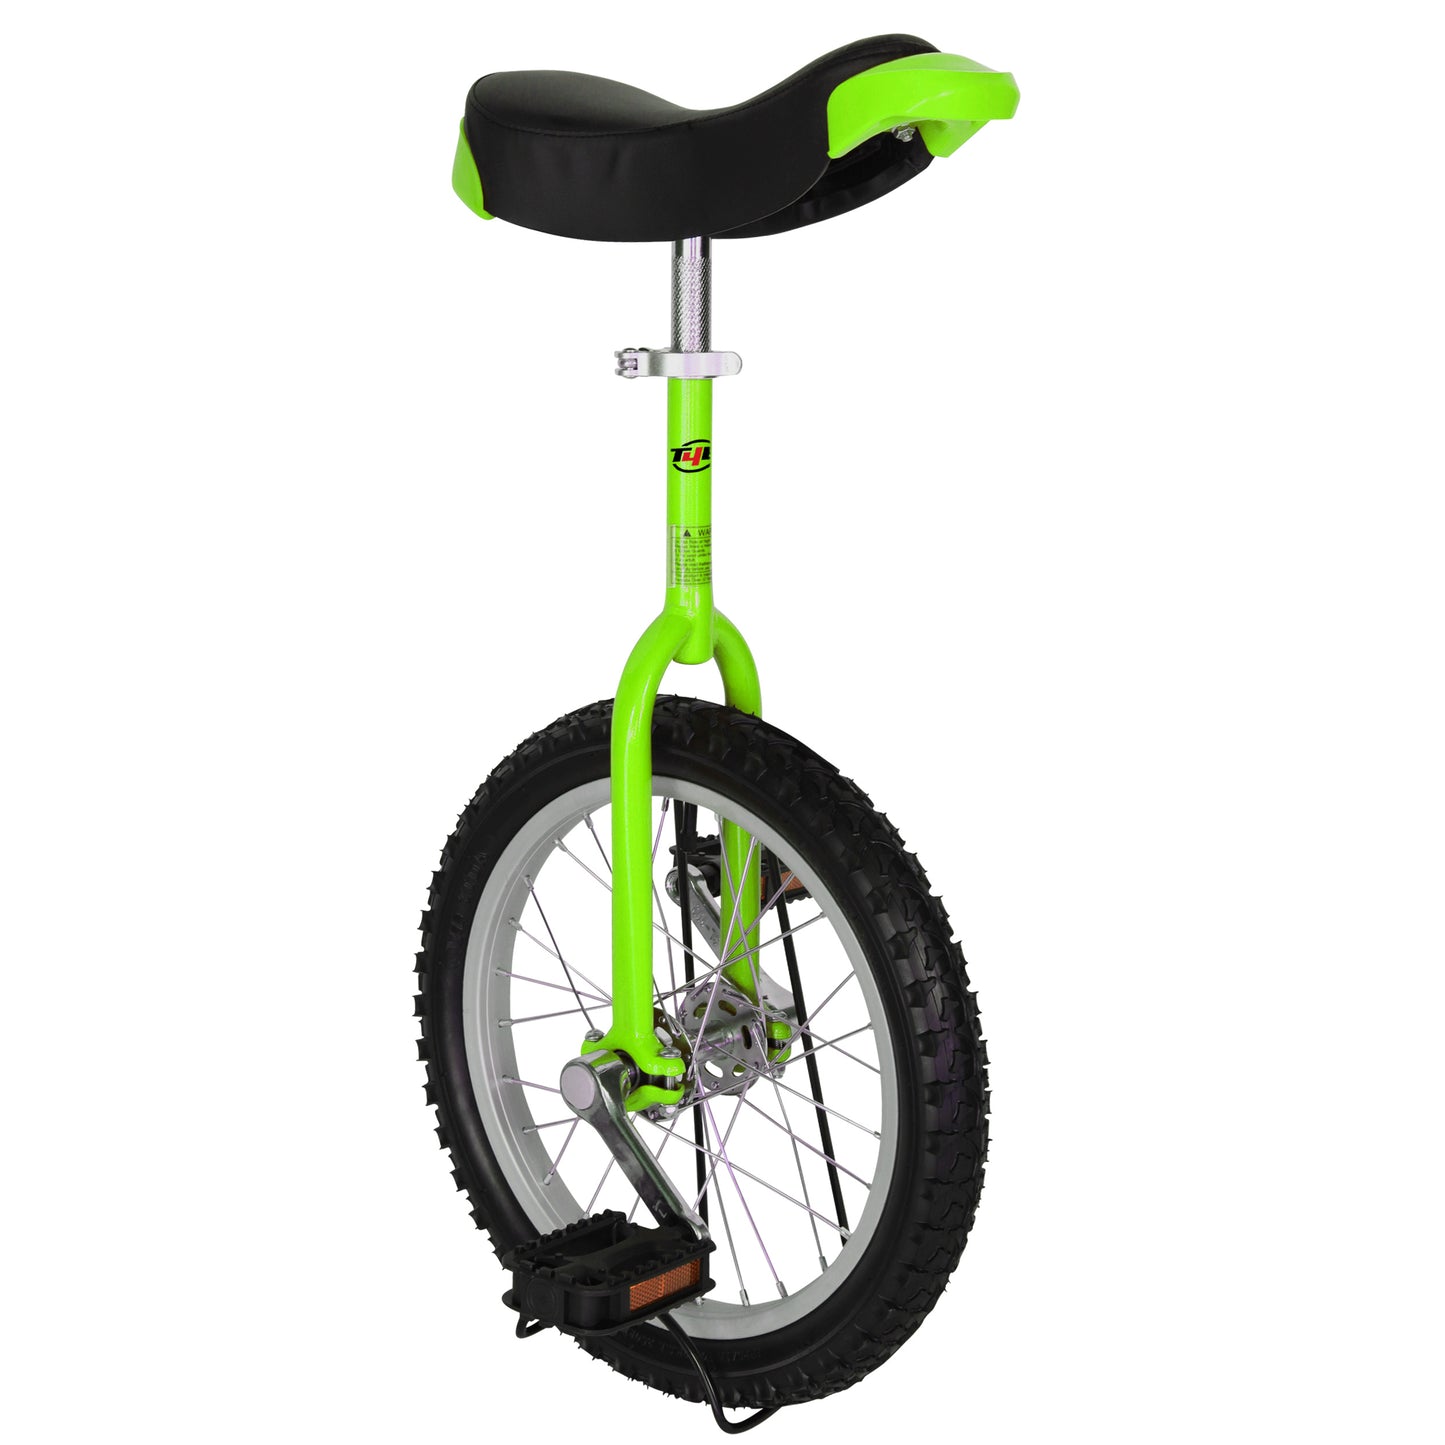 Freestyle Unicycle 16" Wheel 4 Colors Choices